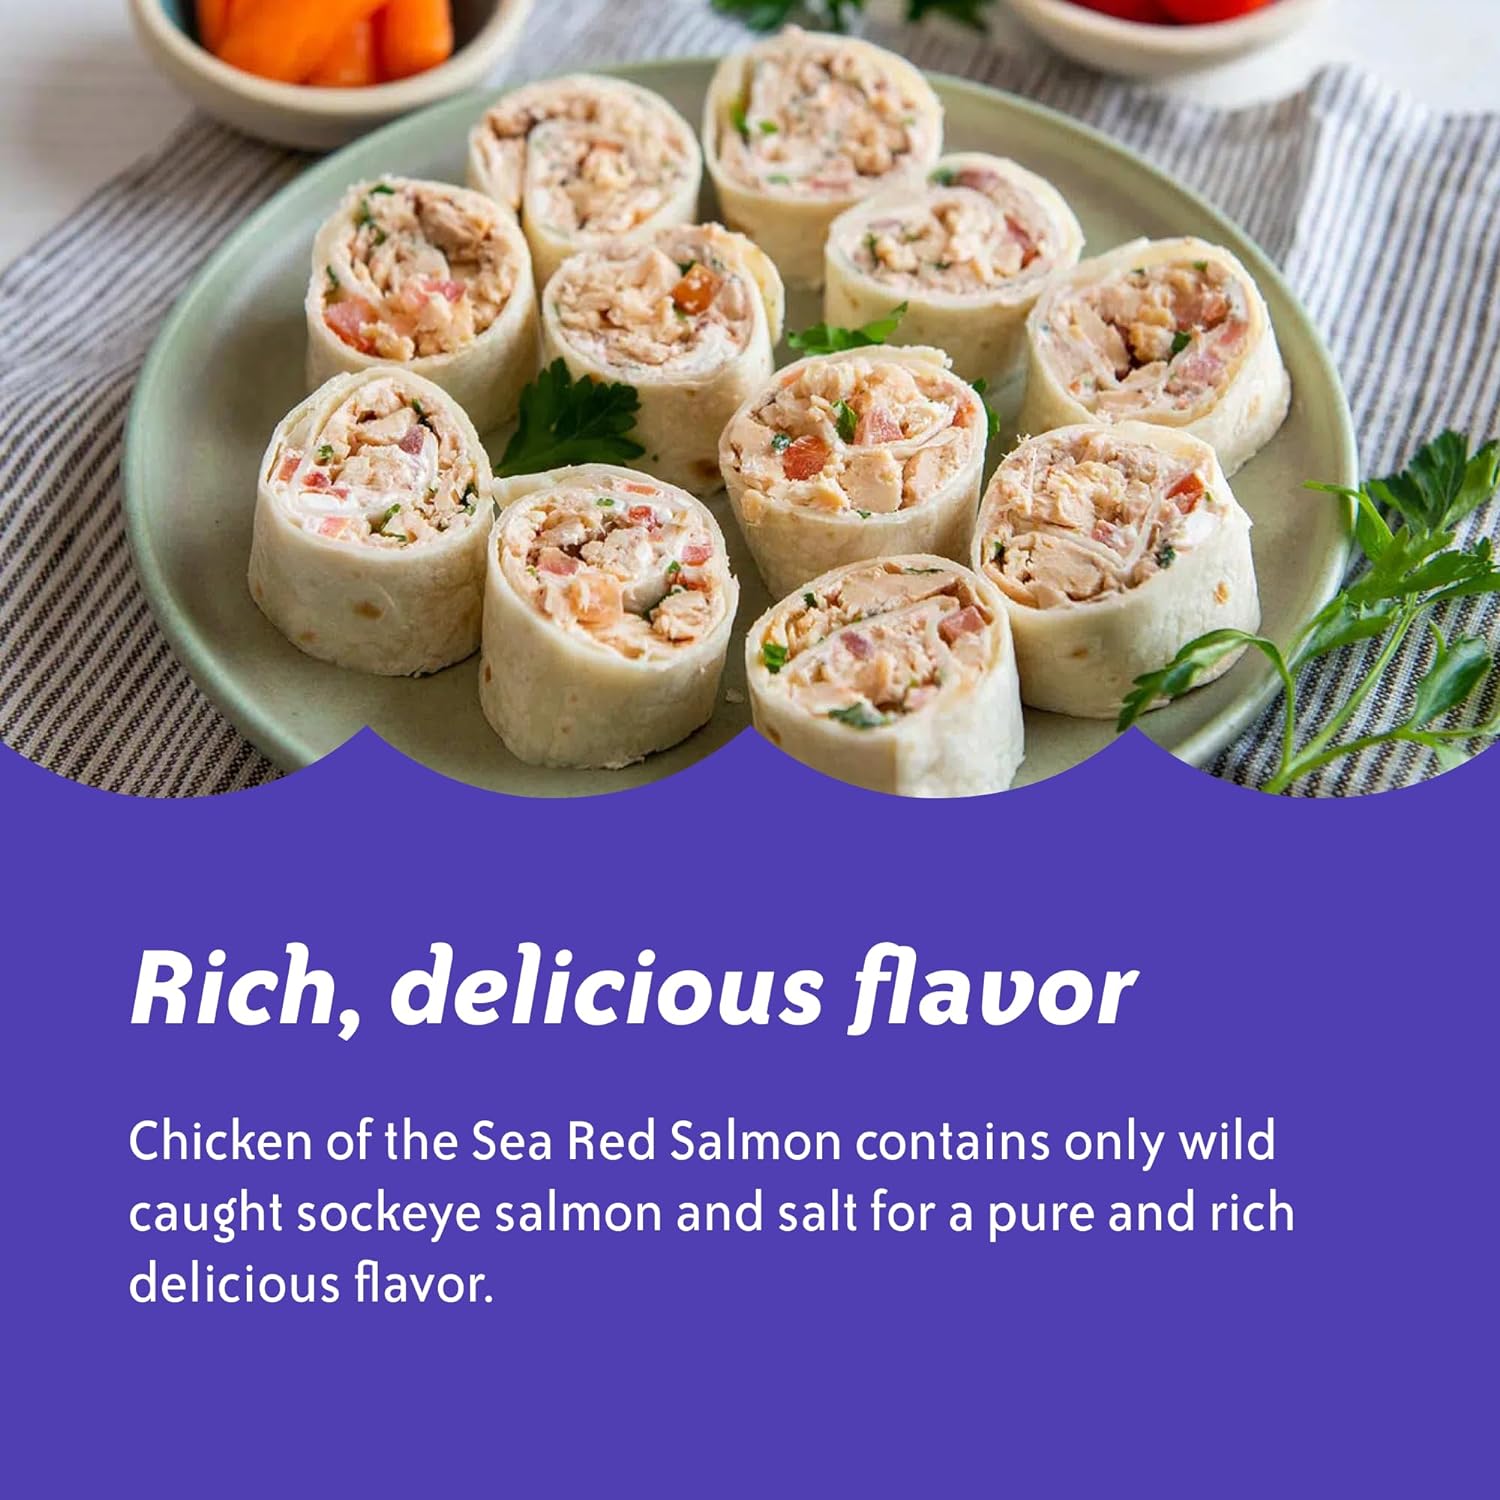 Chicken of the Sea Red Salmon, Canned Salmon, Wild Caught, 14.75-Ounce Cans (Pack of 12) : Grocery & Gourmet Food